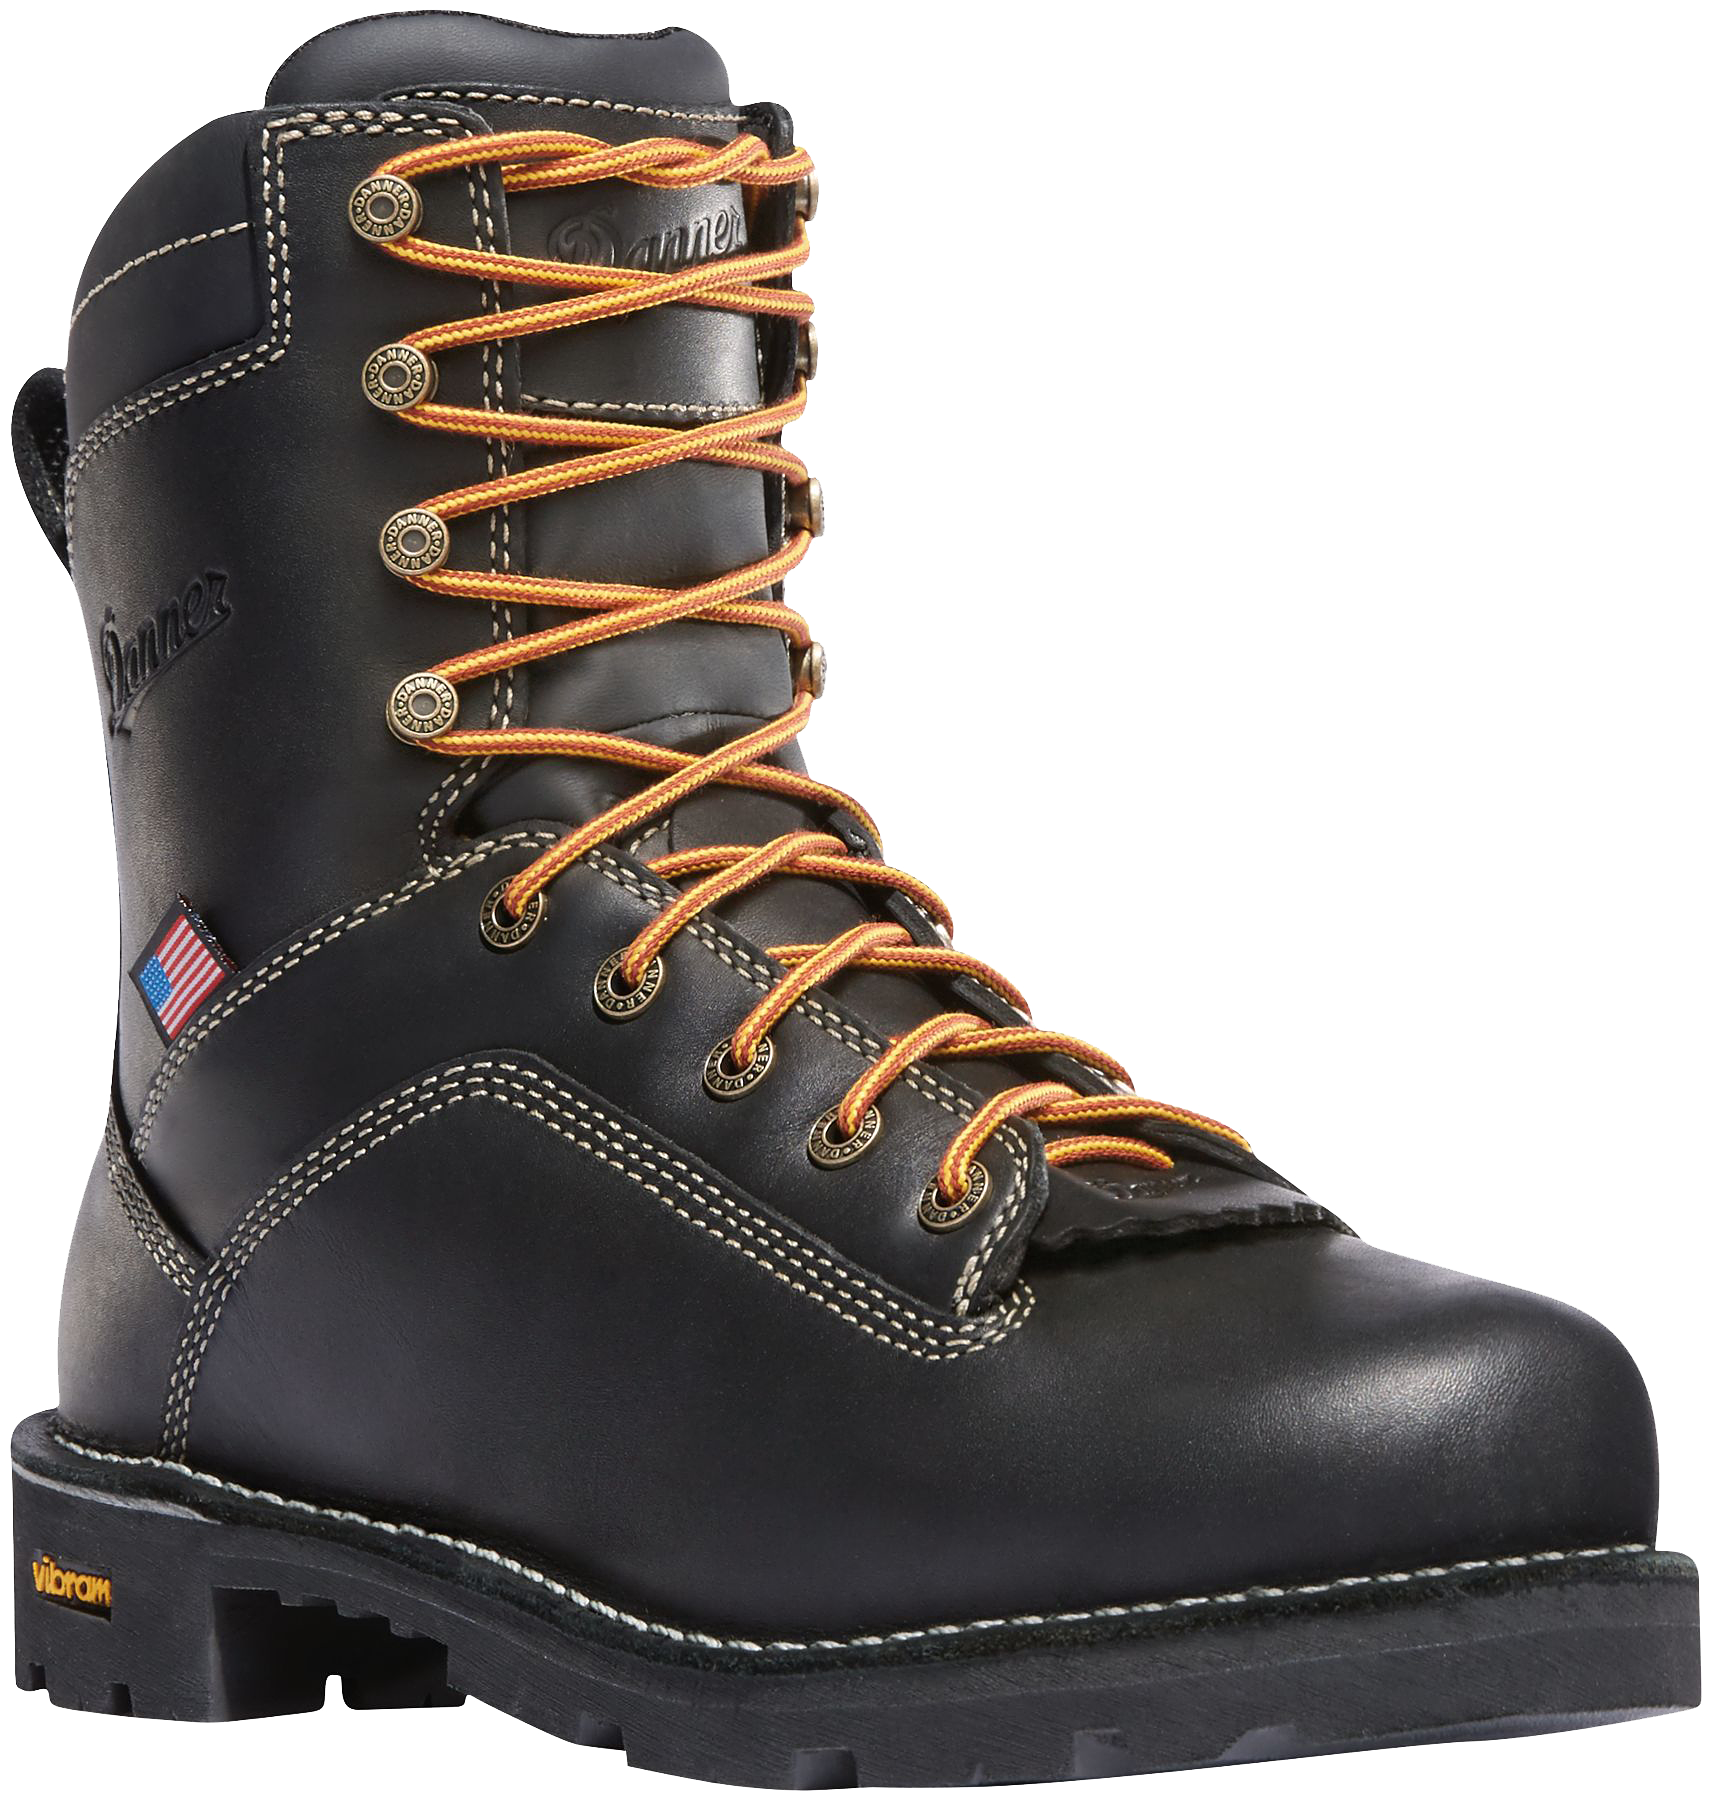 Danner Quarry USA Brown GORE-TEX Alloy Toe Work Boots for Men - Black - 14M